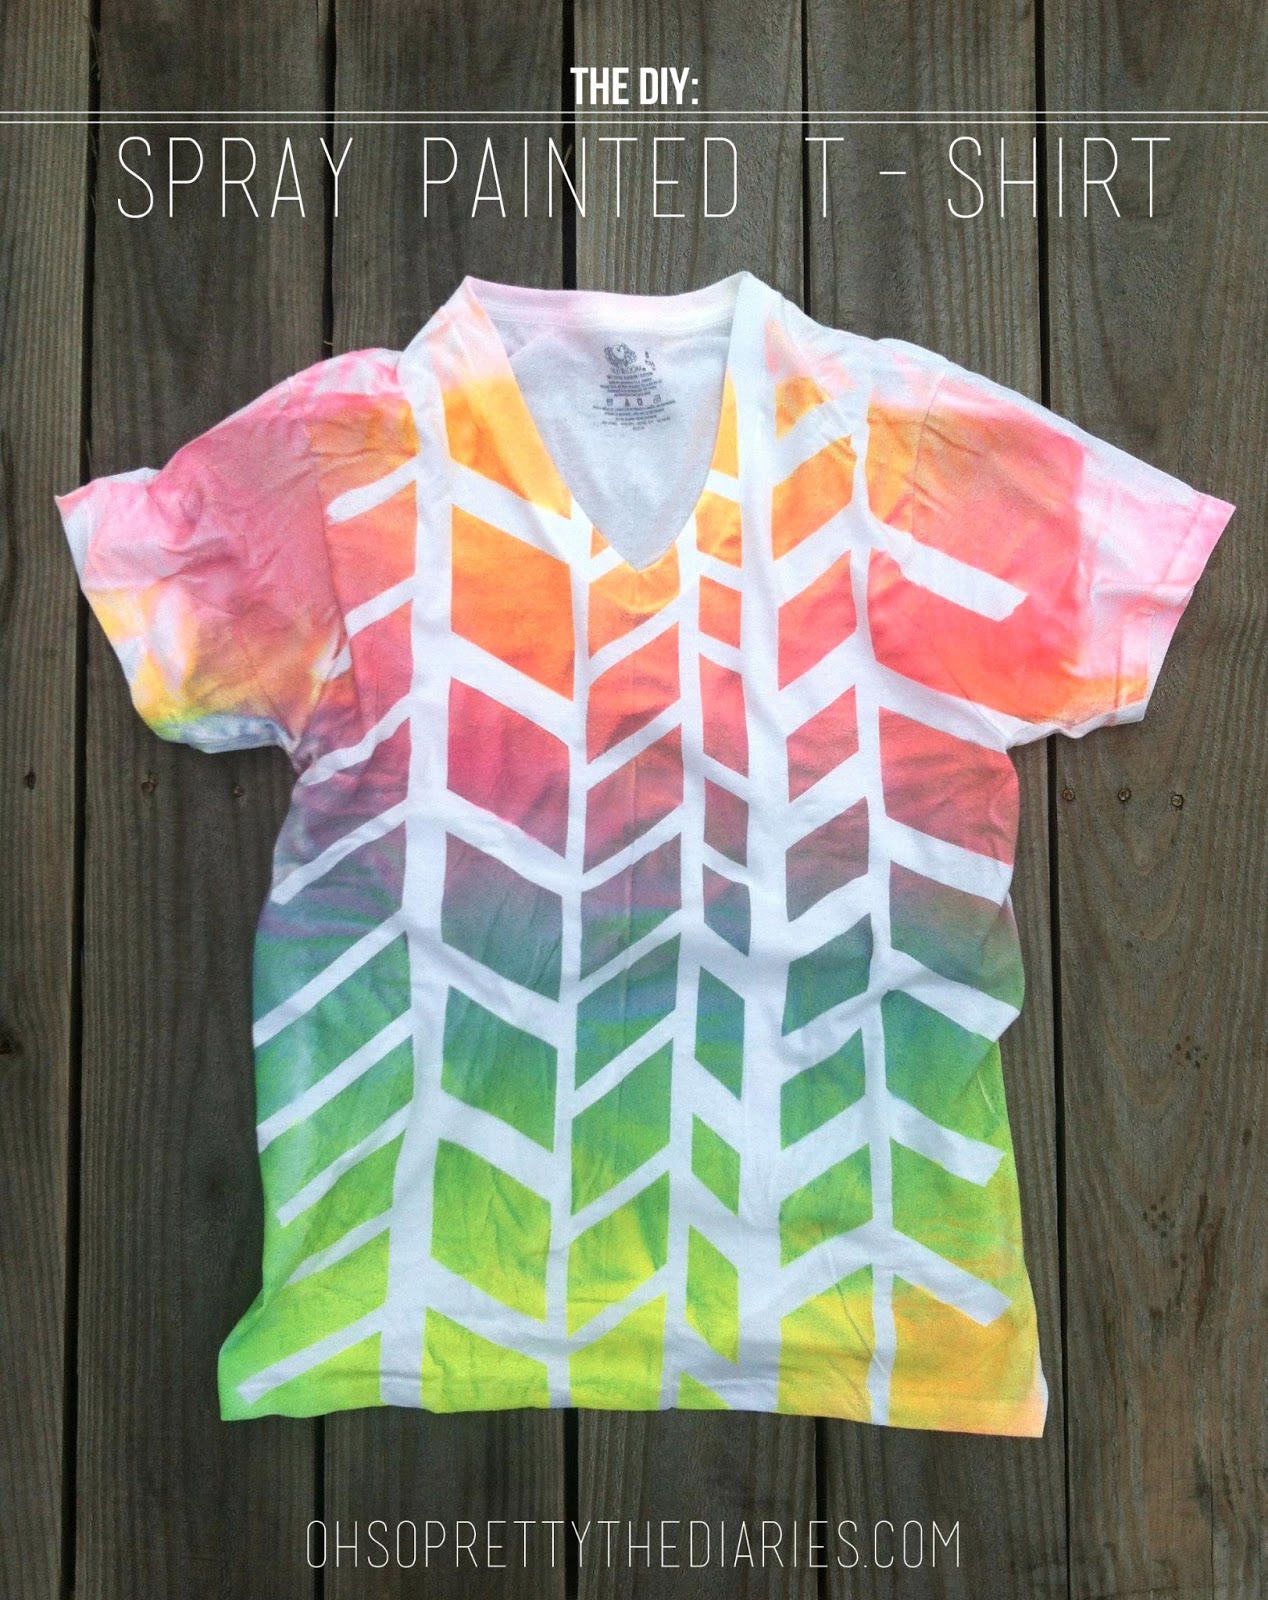 Spray Painted T-shirt